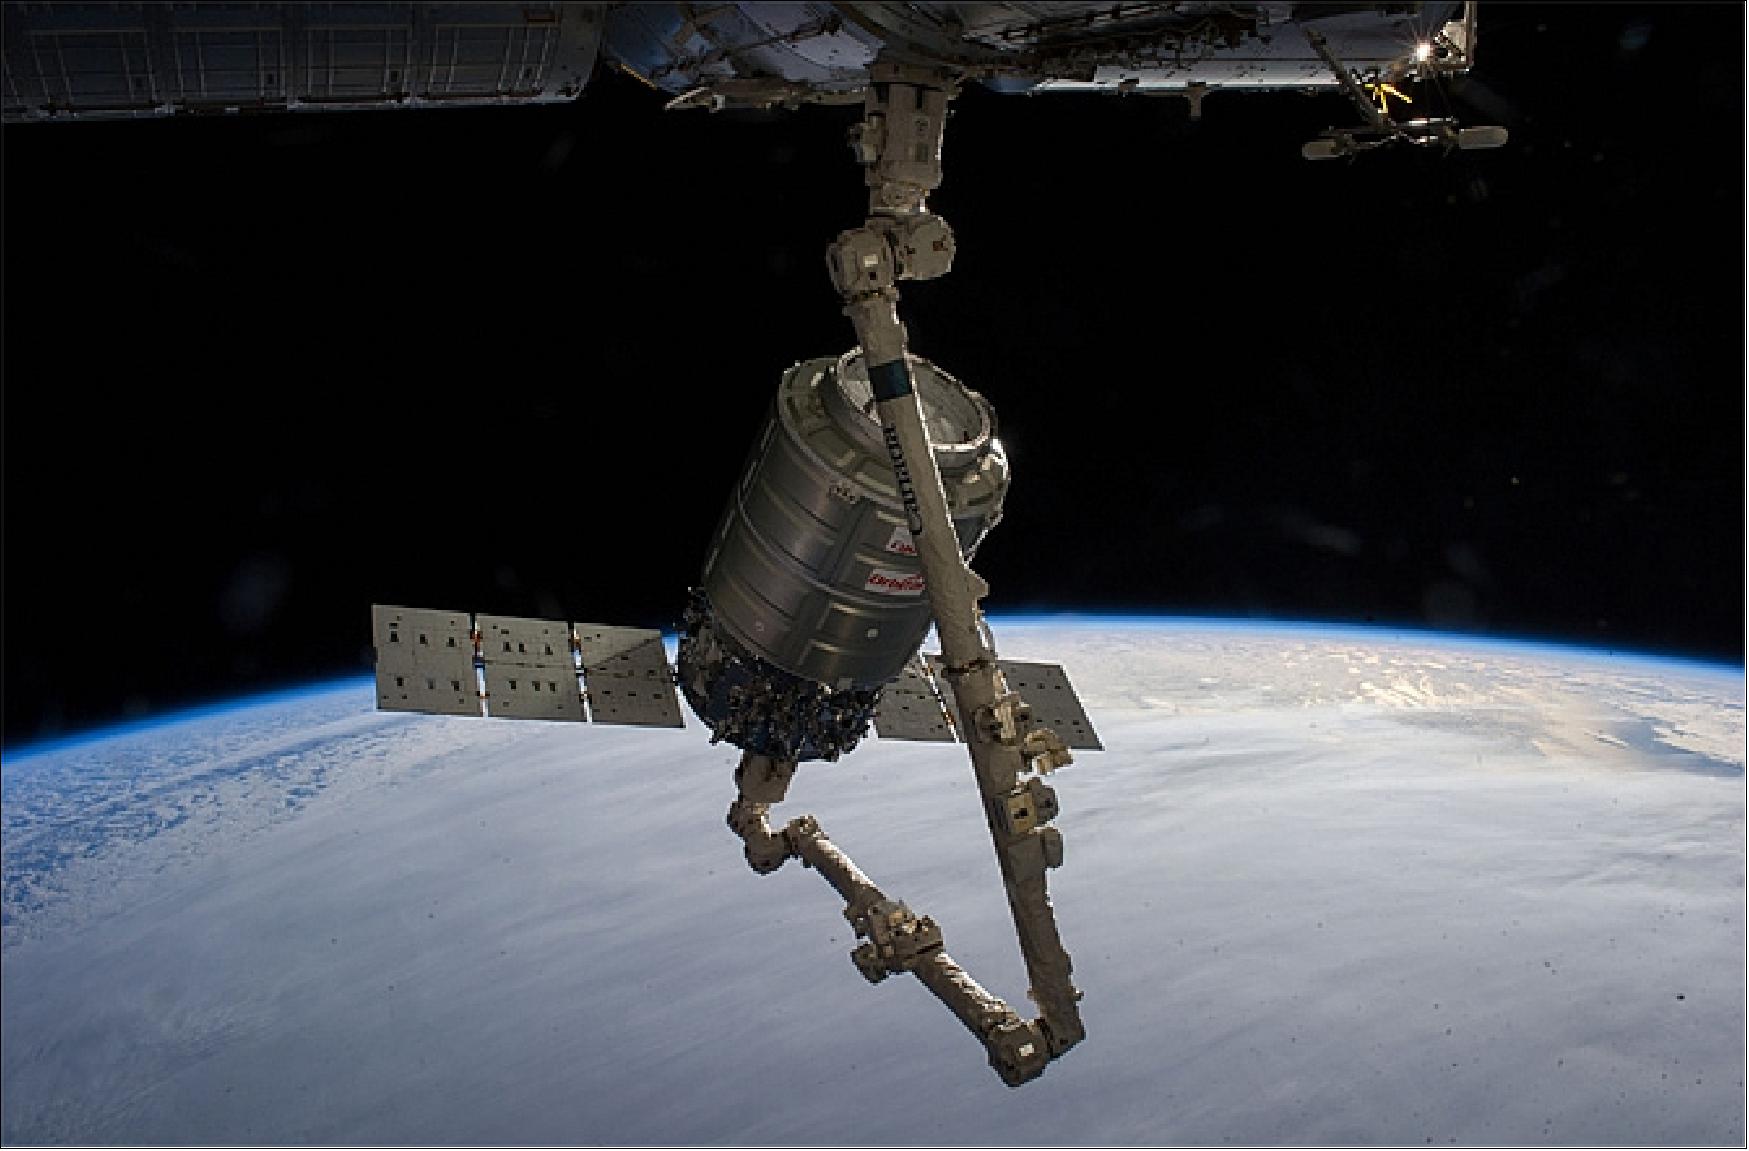 Figure 4: Image of Cygnus grappling with Canadarm2 and berthing to the ISS (image credit: NASA)